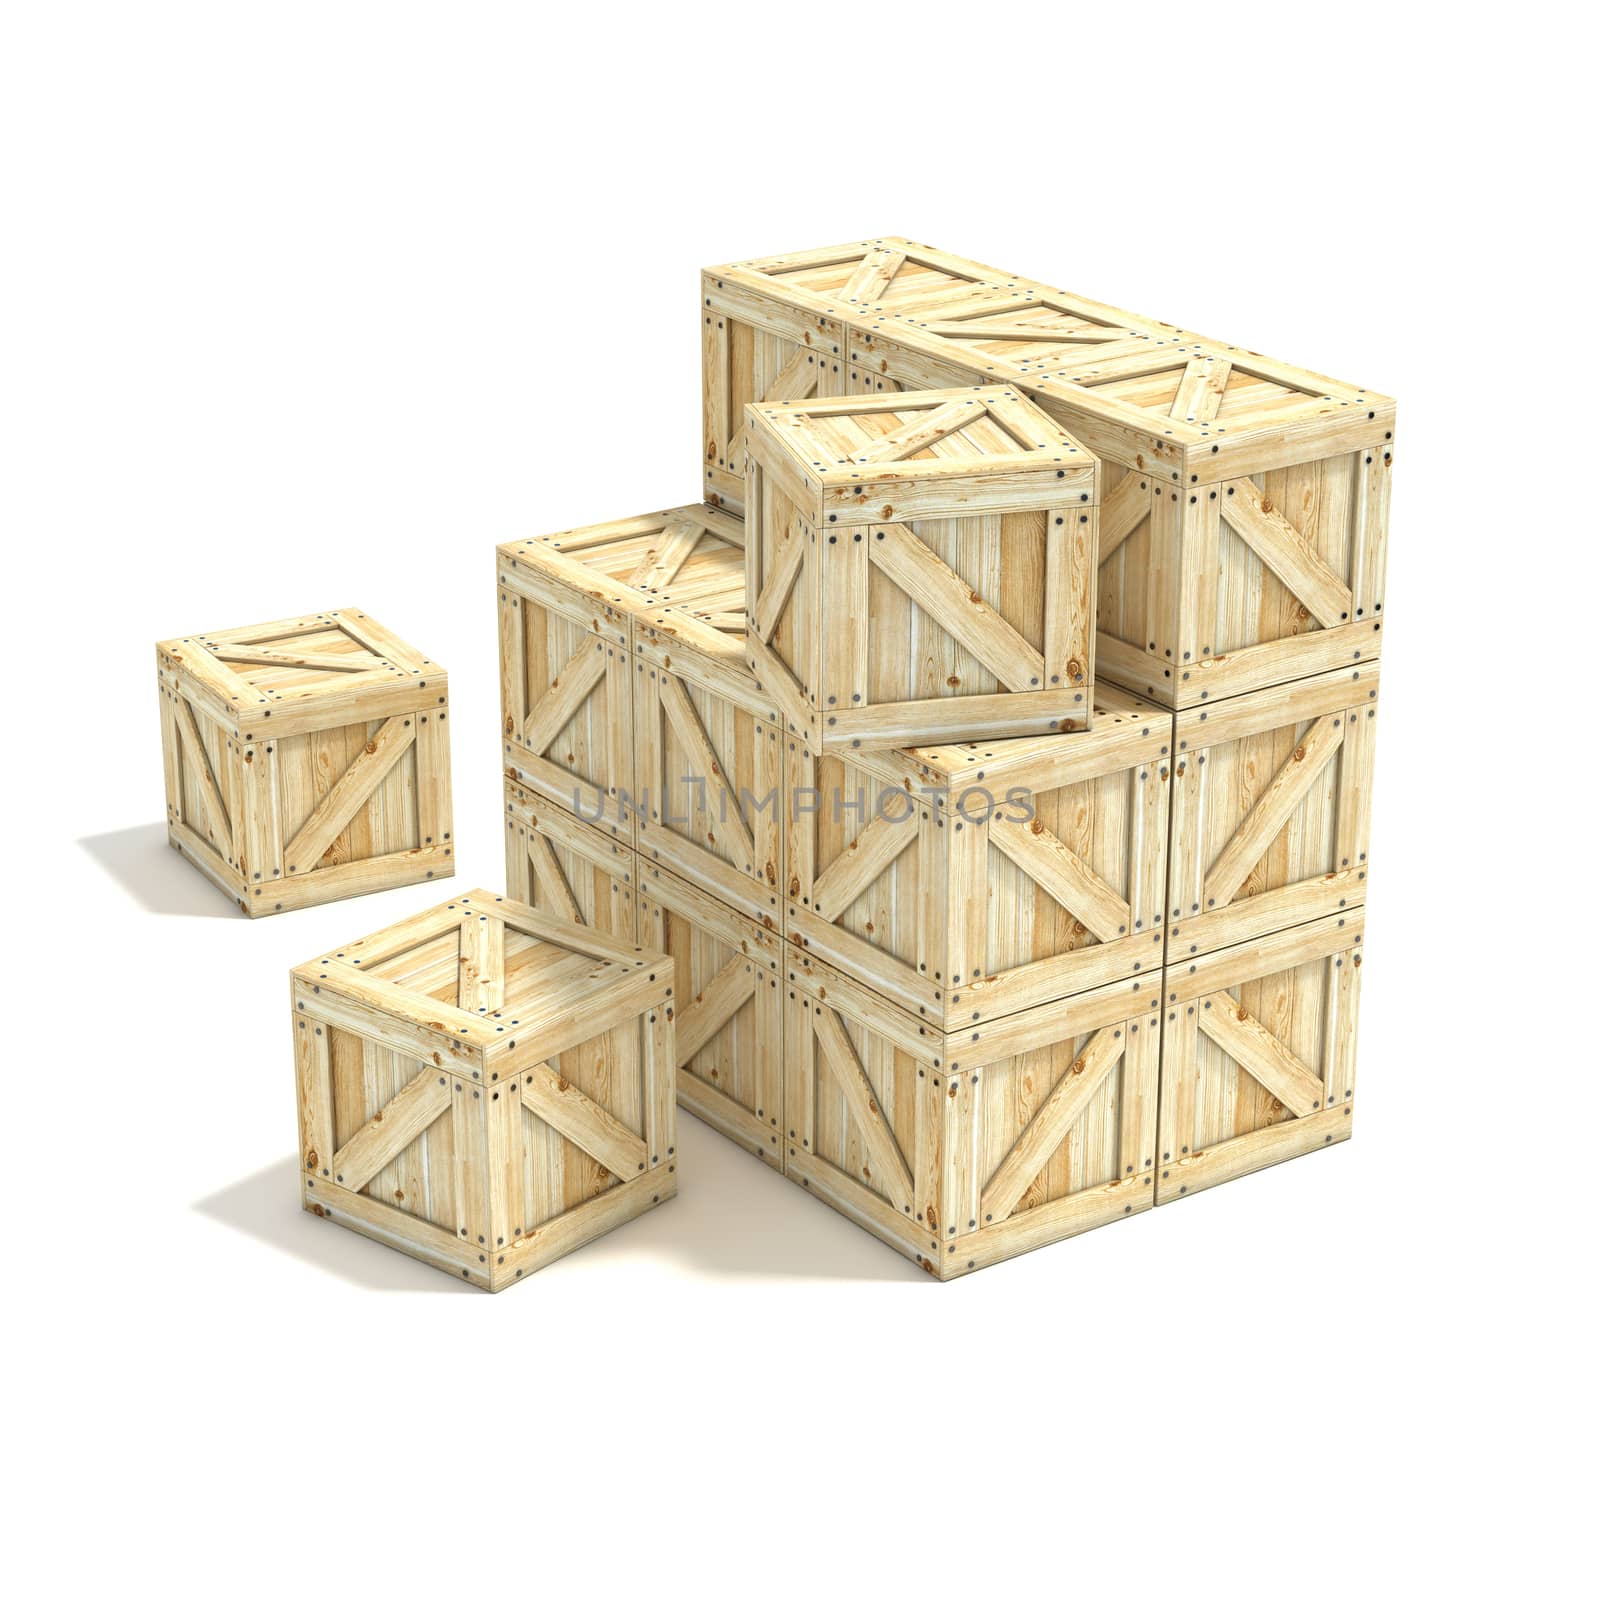 Wooden boxes. 3D by djmilic